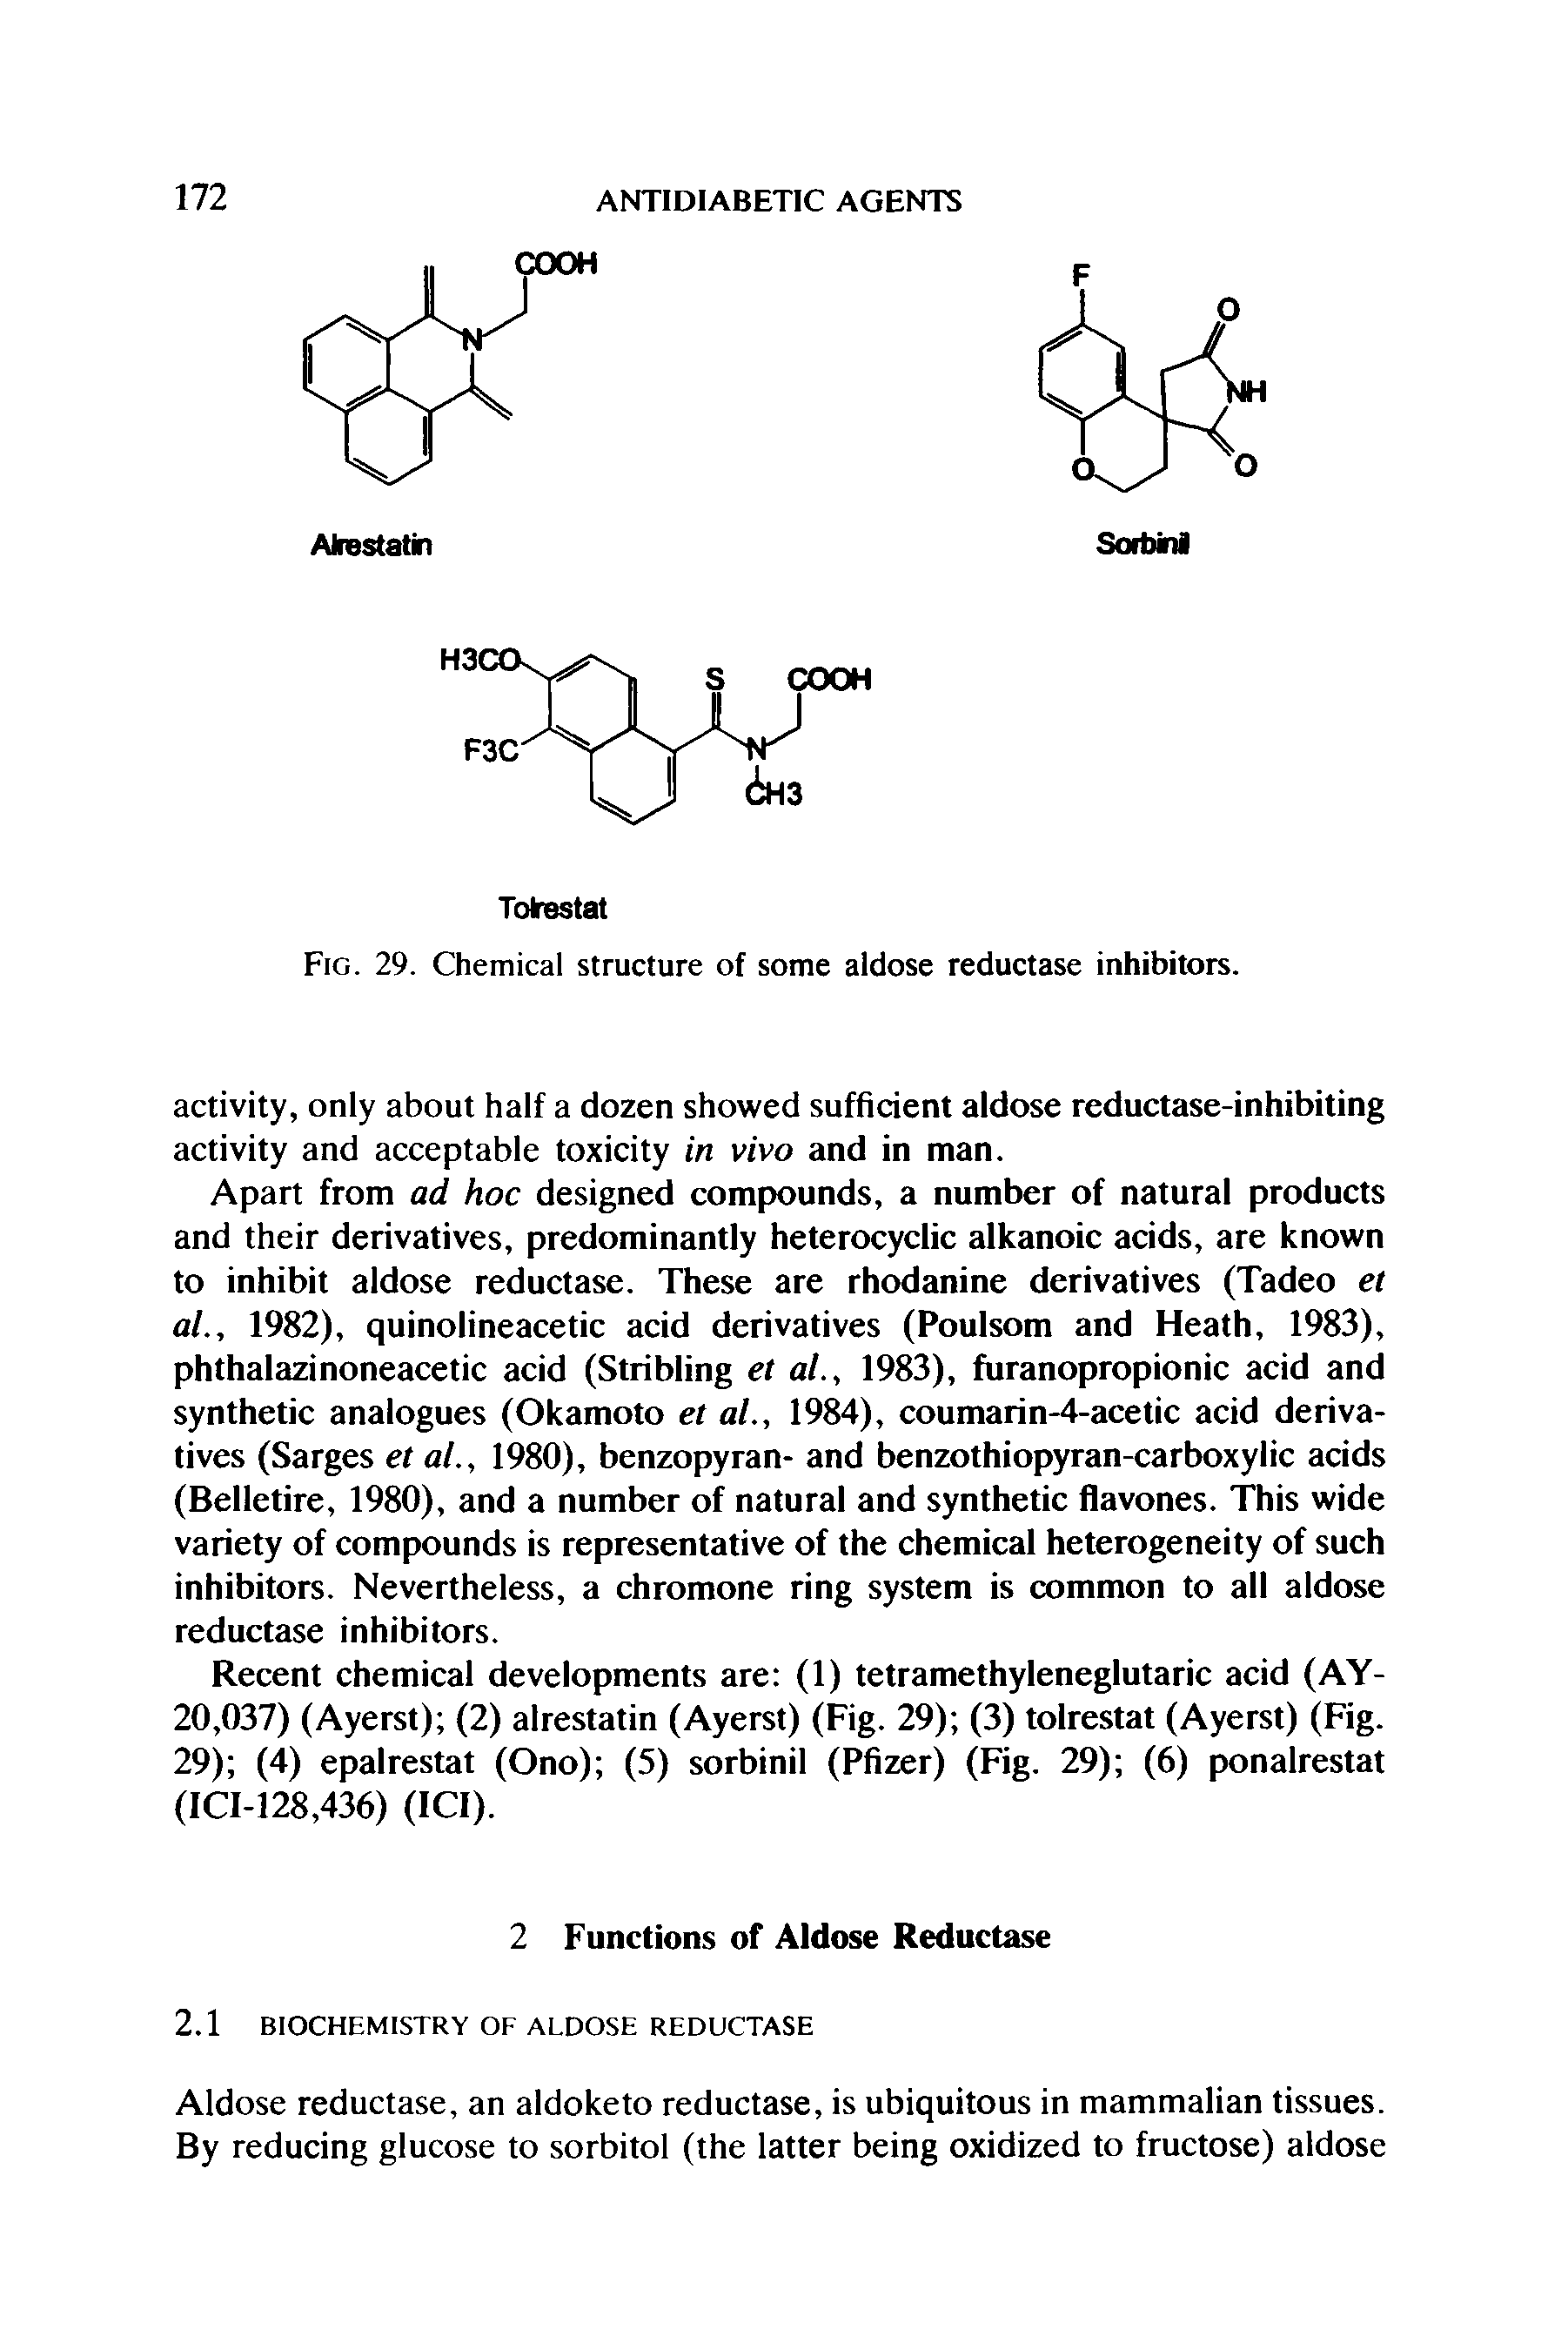 Fig. 29. Chemical structure of some aldose reductase inhibitors.